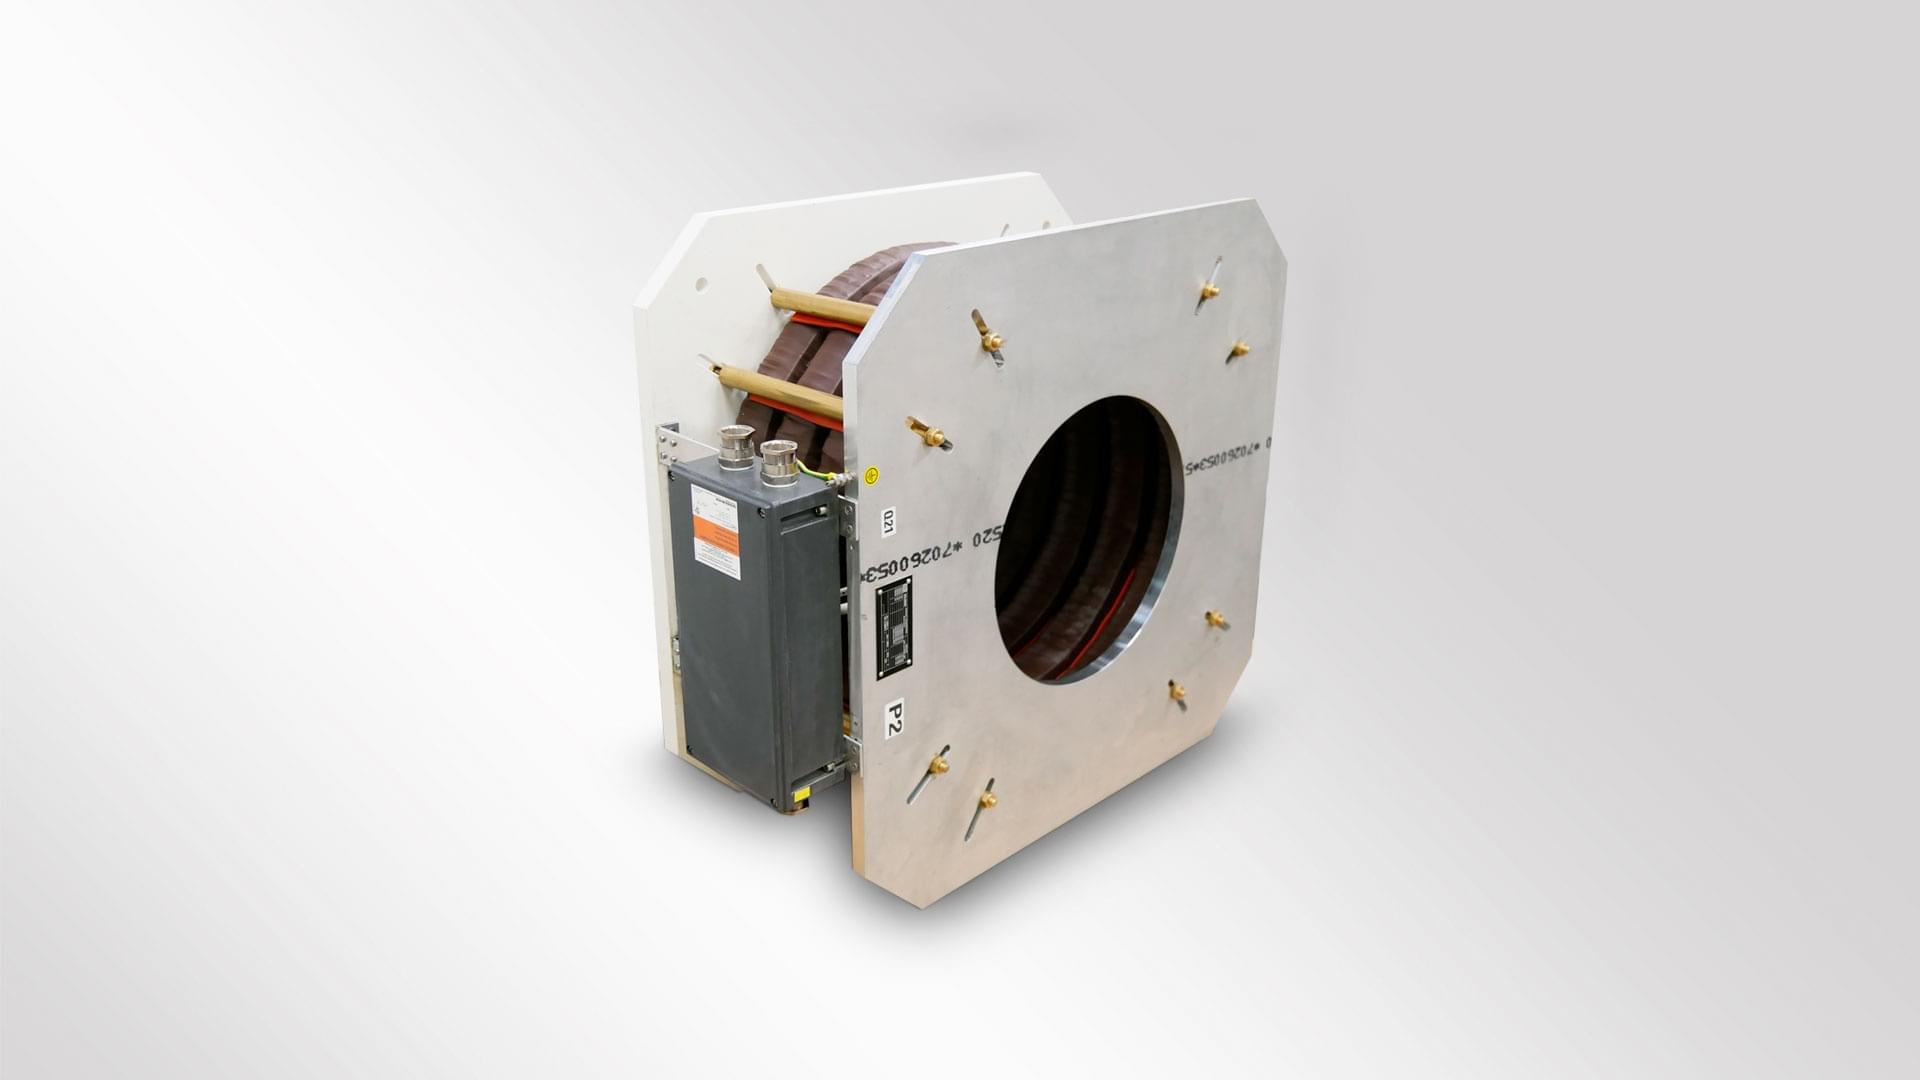 A rectangular white current transformer designed for use in generators in power stations